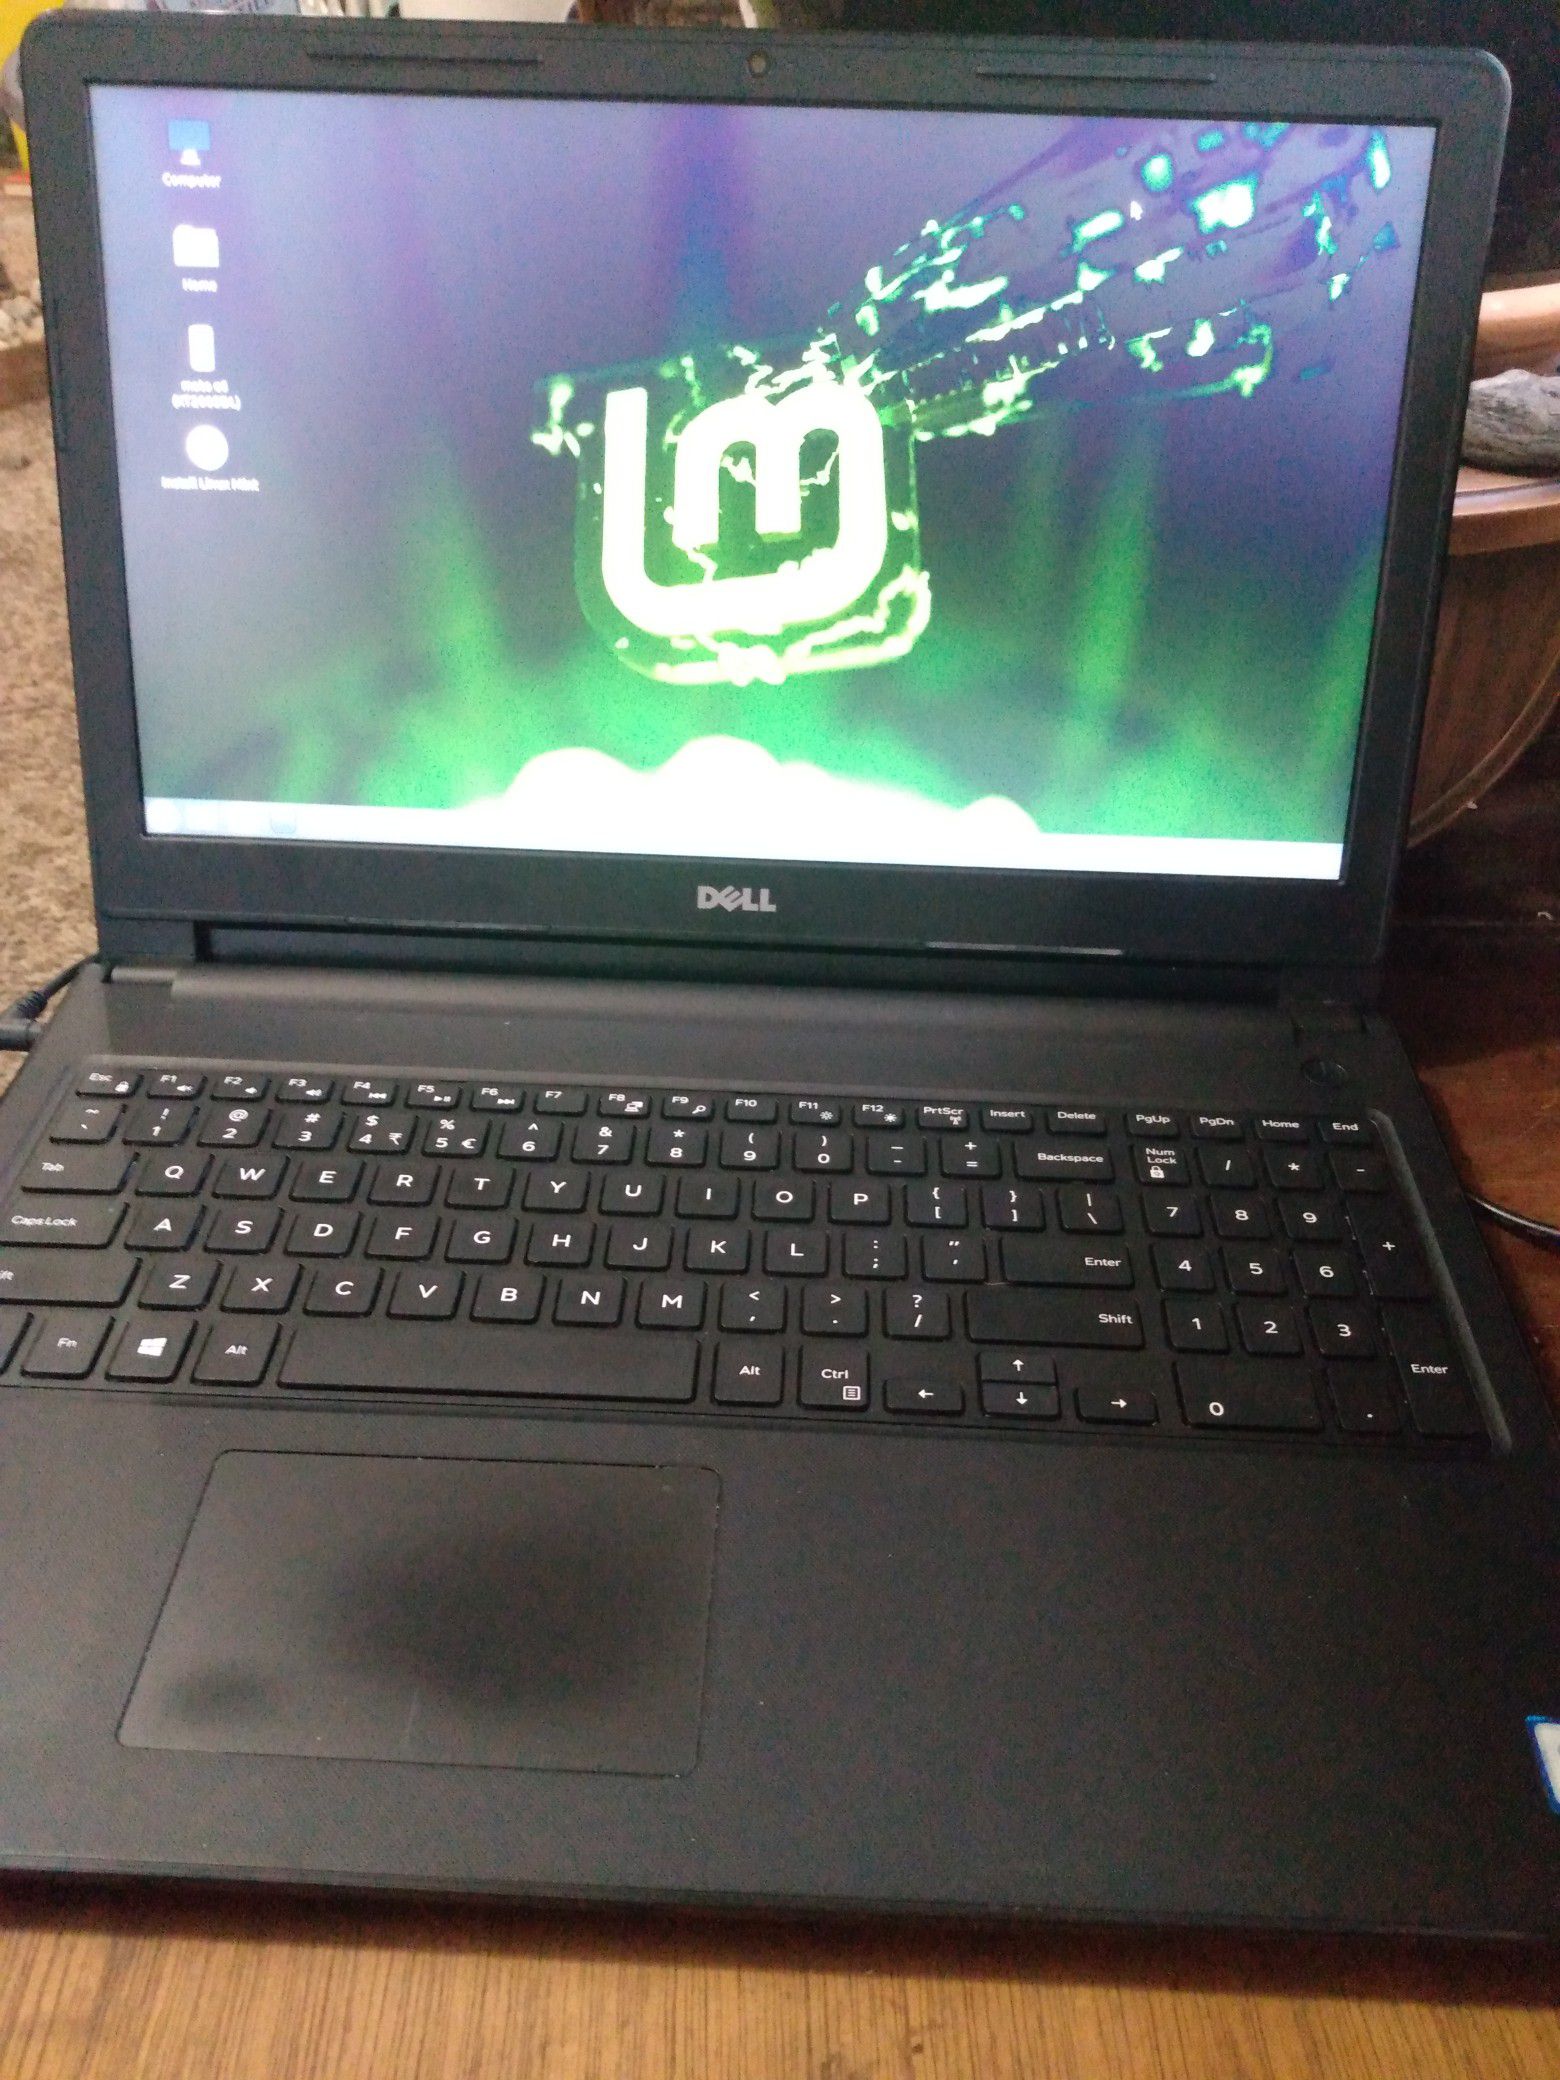 2018 Dell I5 1000 gb disk 3.0 GHz x4 running Linux mint